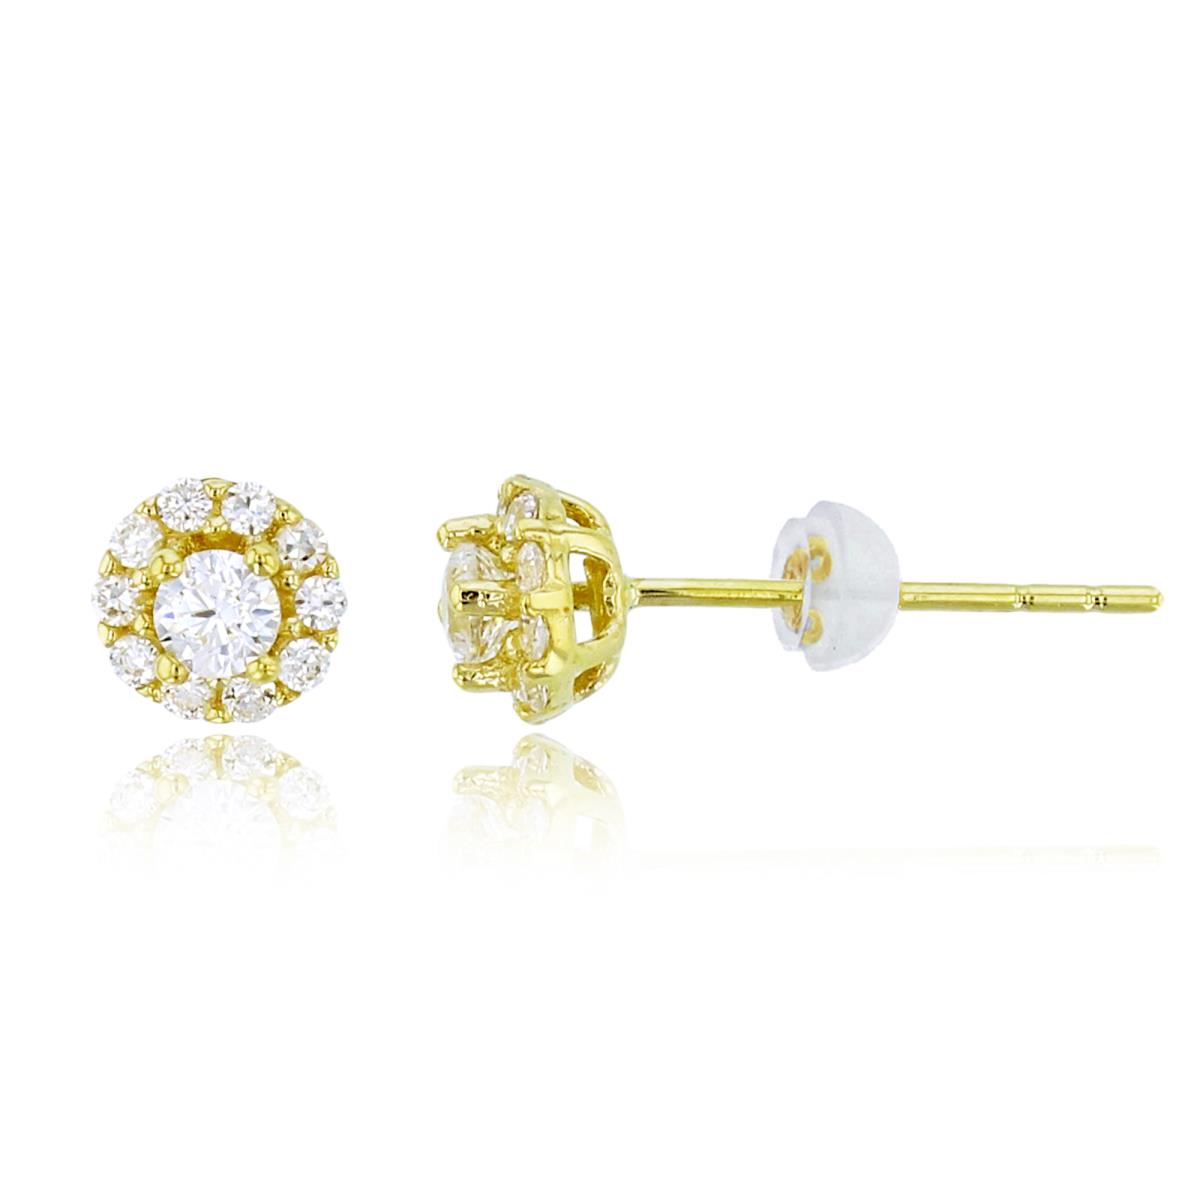 14K Yellow Gold 2.5mm Rnd CZ Center Halo Studs with Silicon Backs